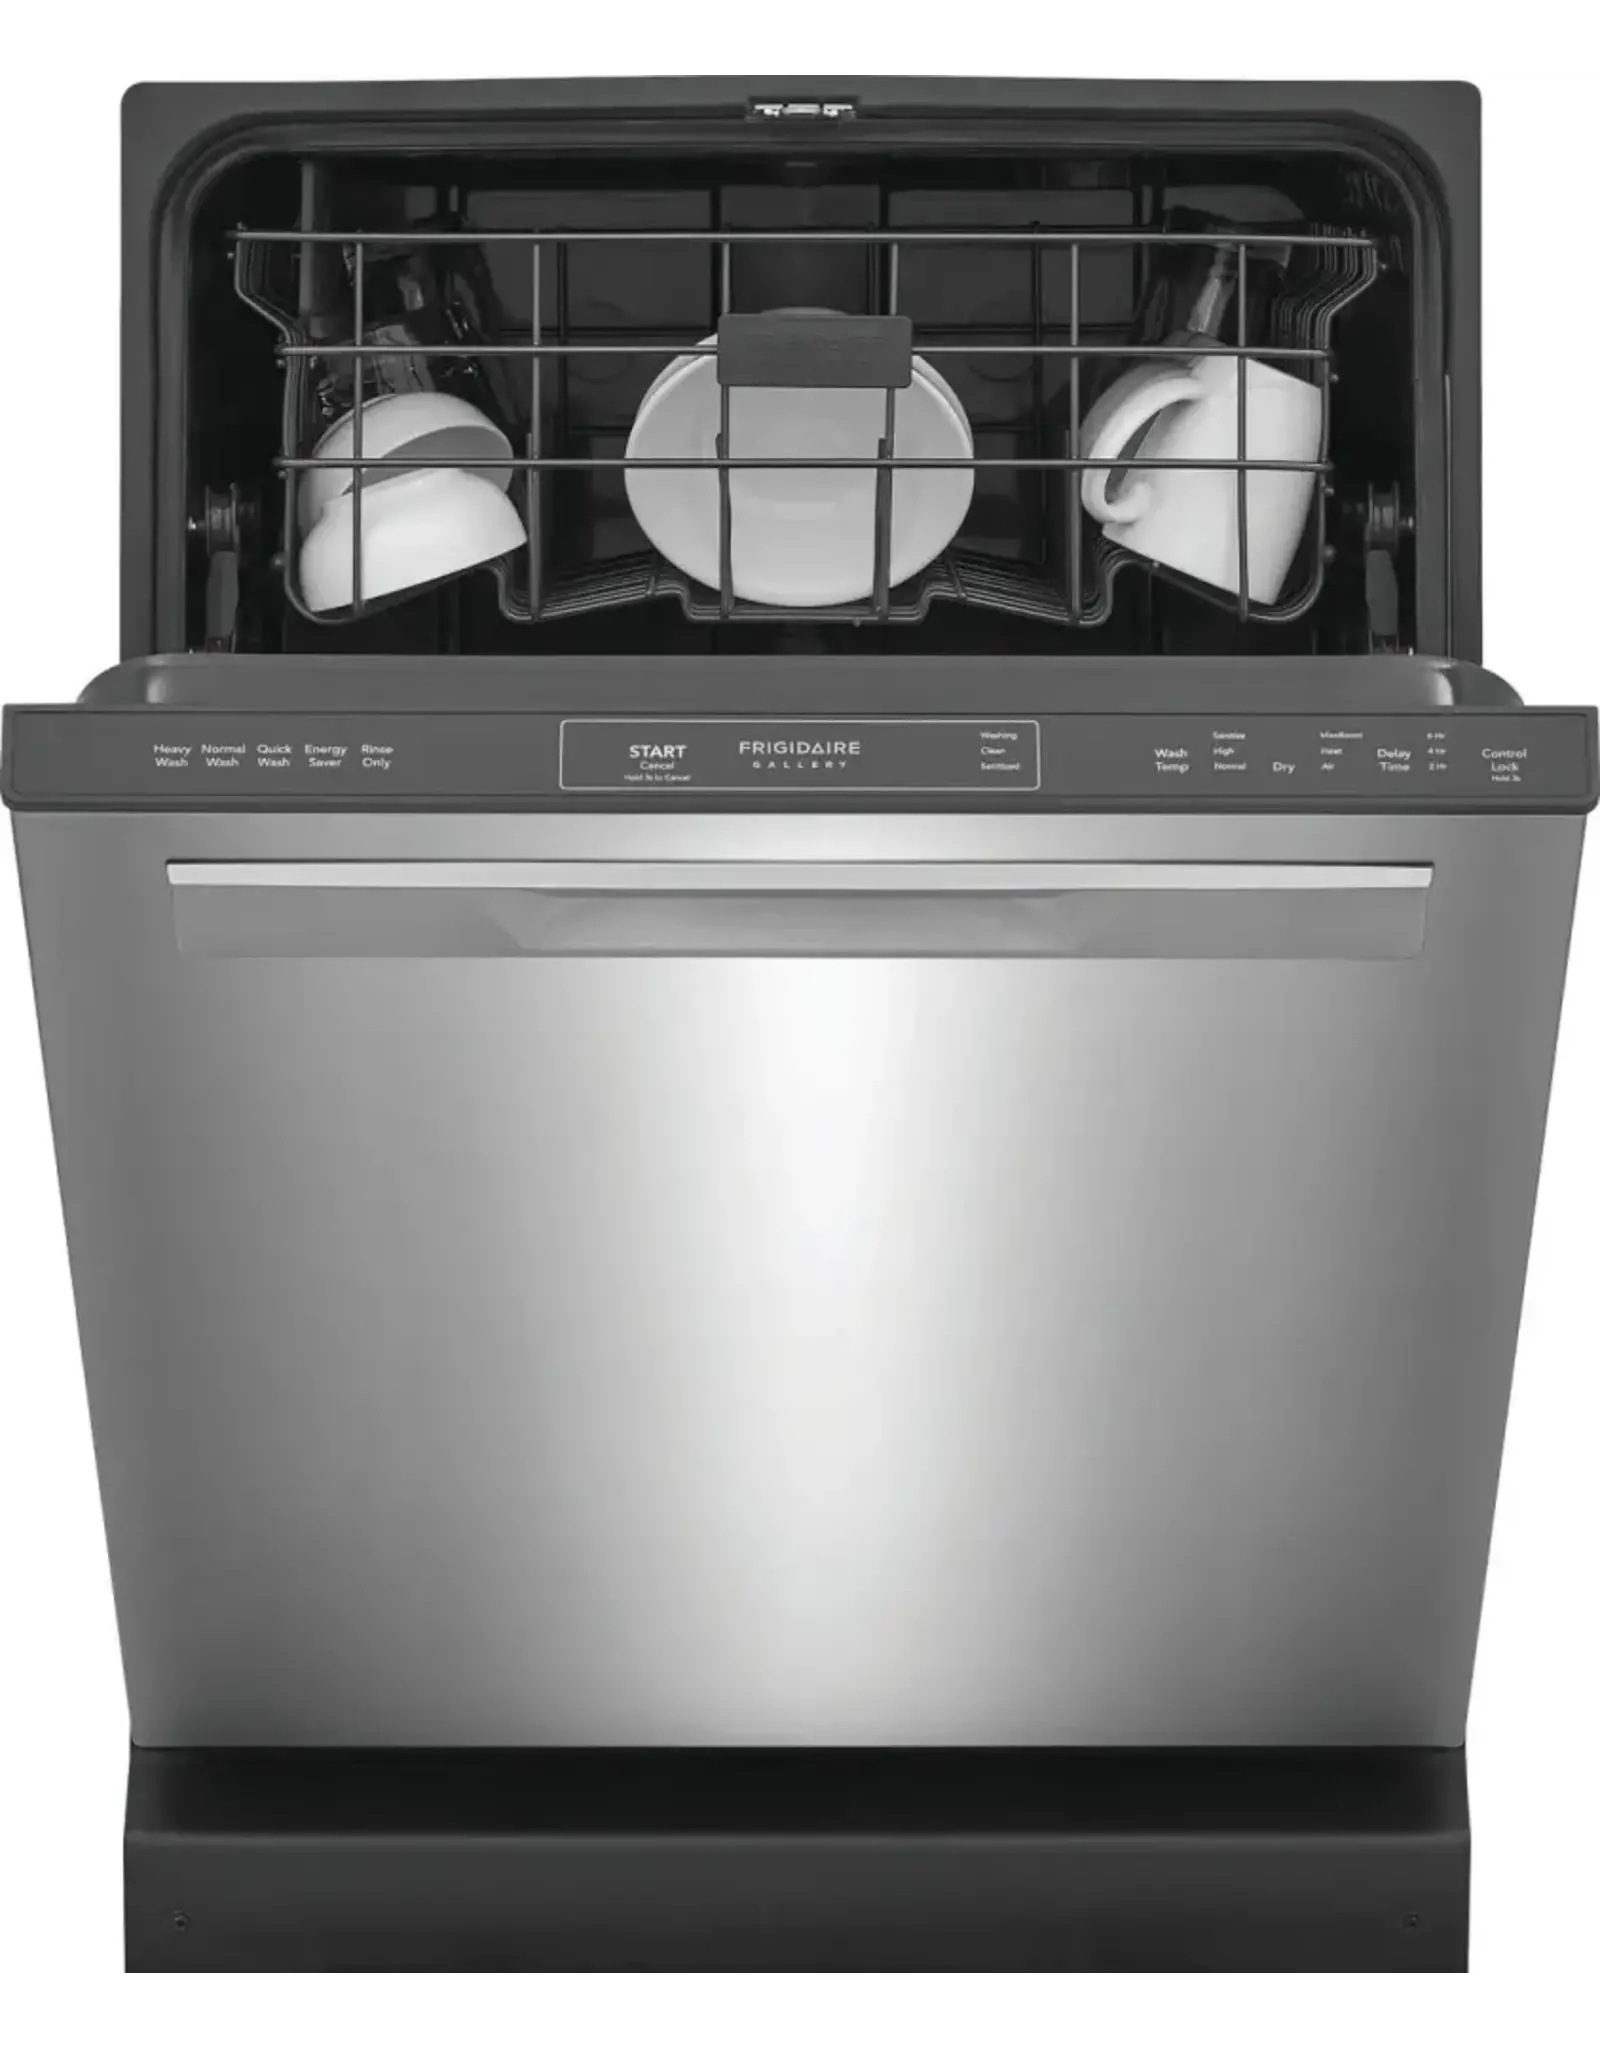 FRIGIDAIRE GDPP4515AF Frigidaire Gallery Top Control 24-in Built-In Dishwasher (Fingerprint Resistant Stainless Steel) ENERGY STAR, 52-dBA